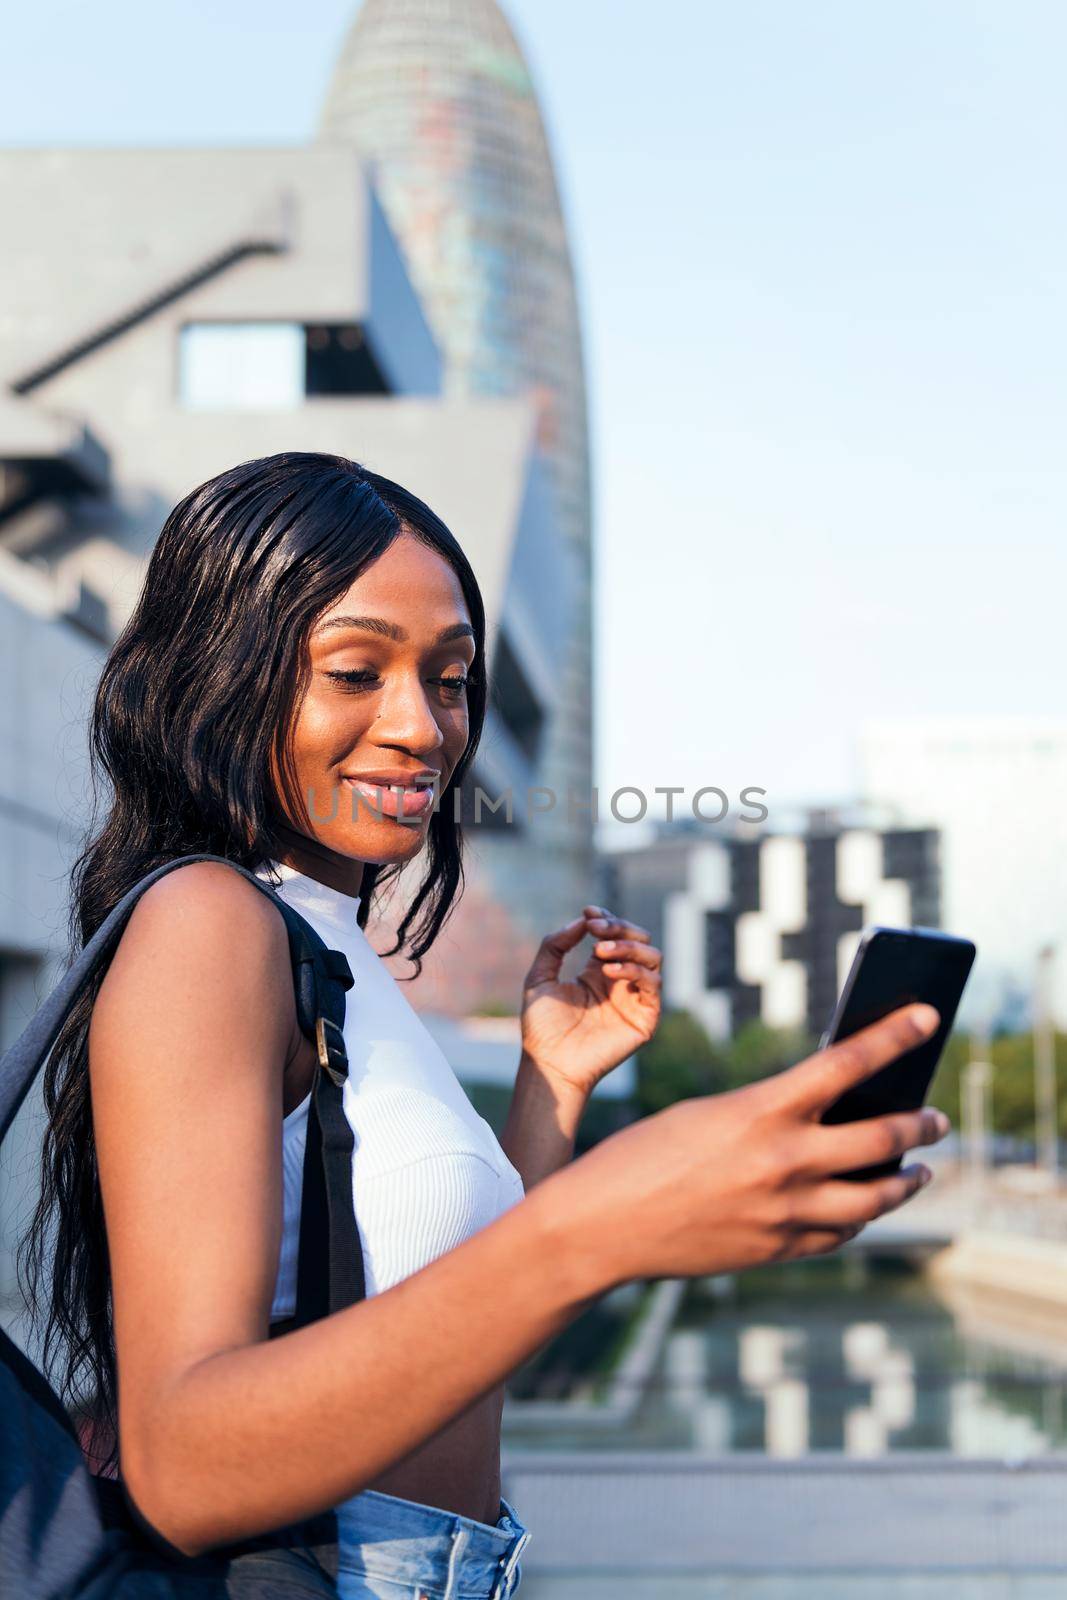 young black girl with backpack smiles consulting her cell phone, concept of youth and urban lifestyle, copy space for text